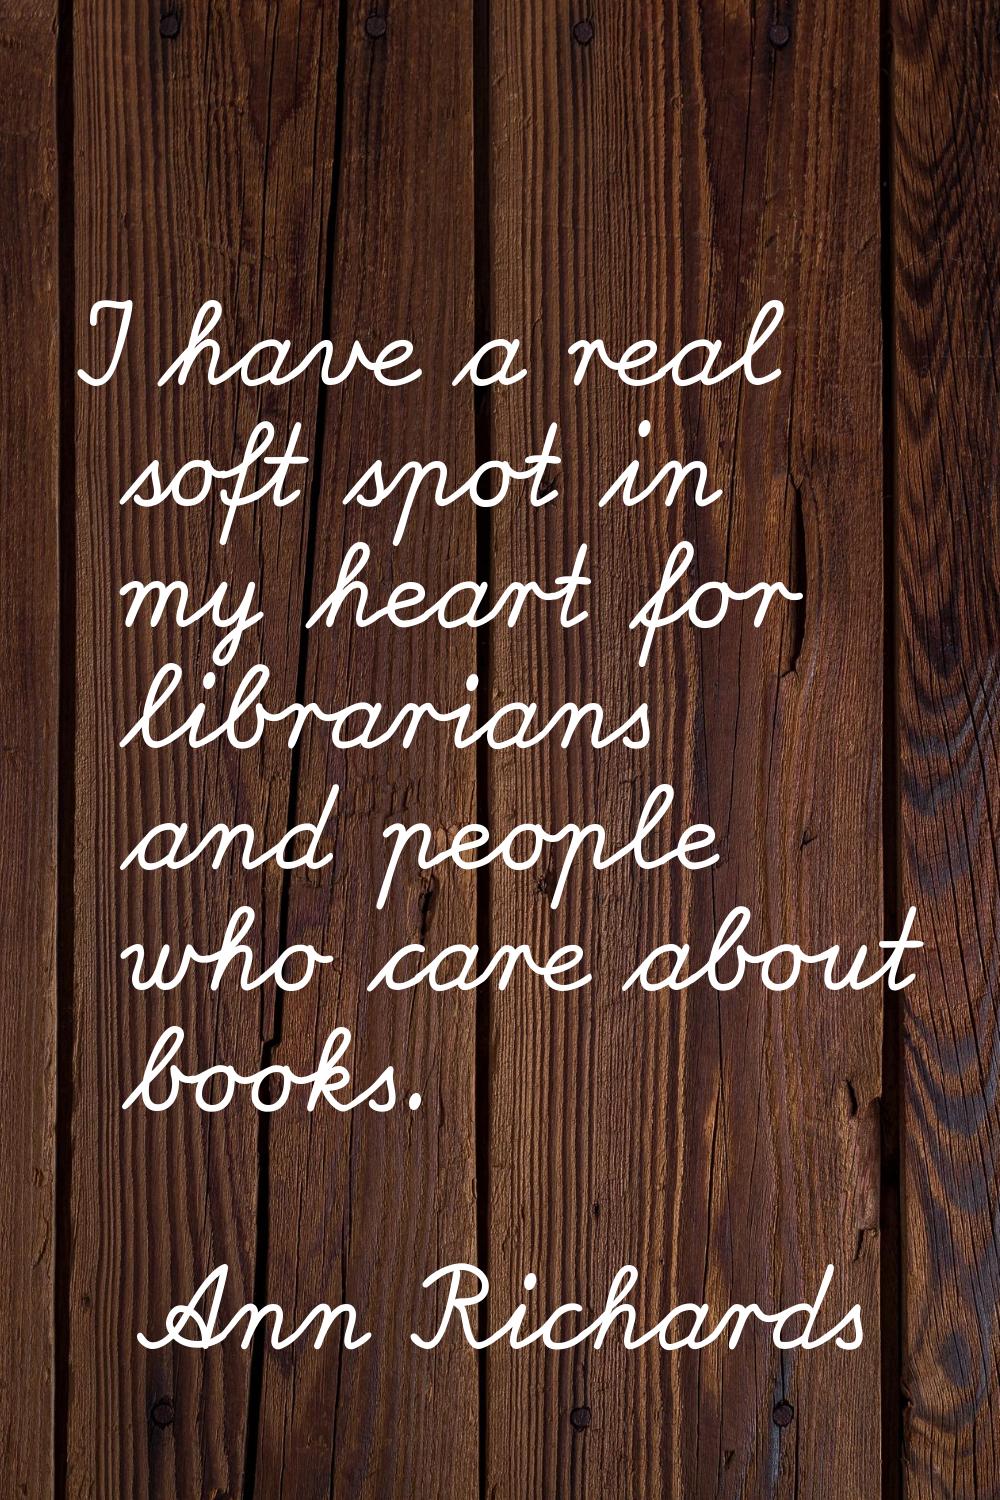 I have a real soft spot in my heart for librarians and people who care about books.